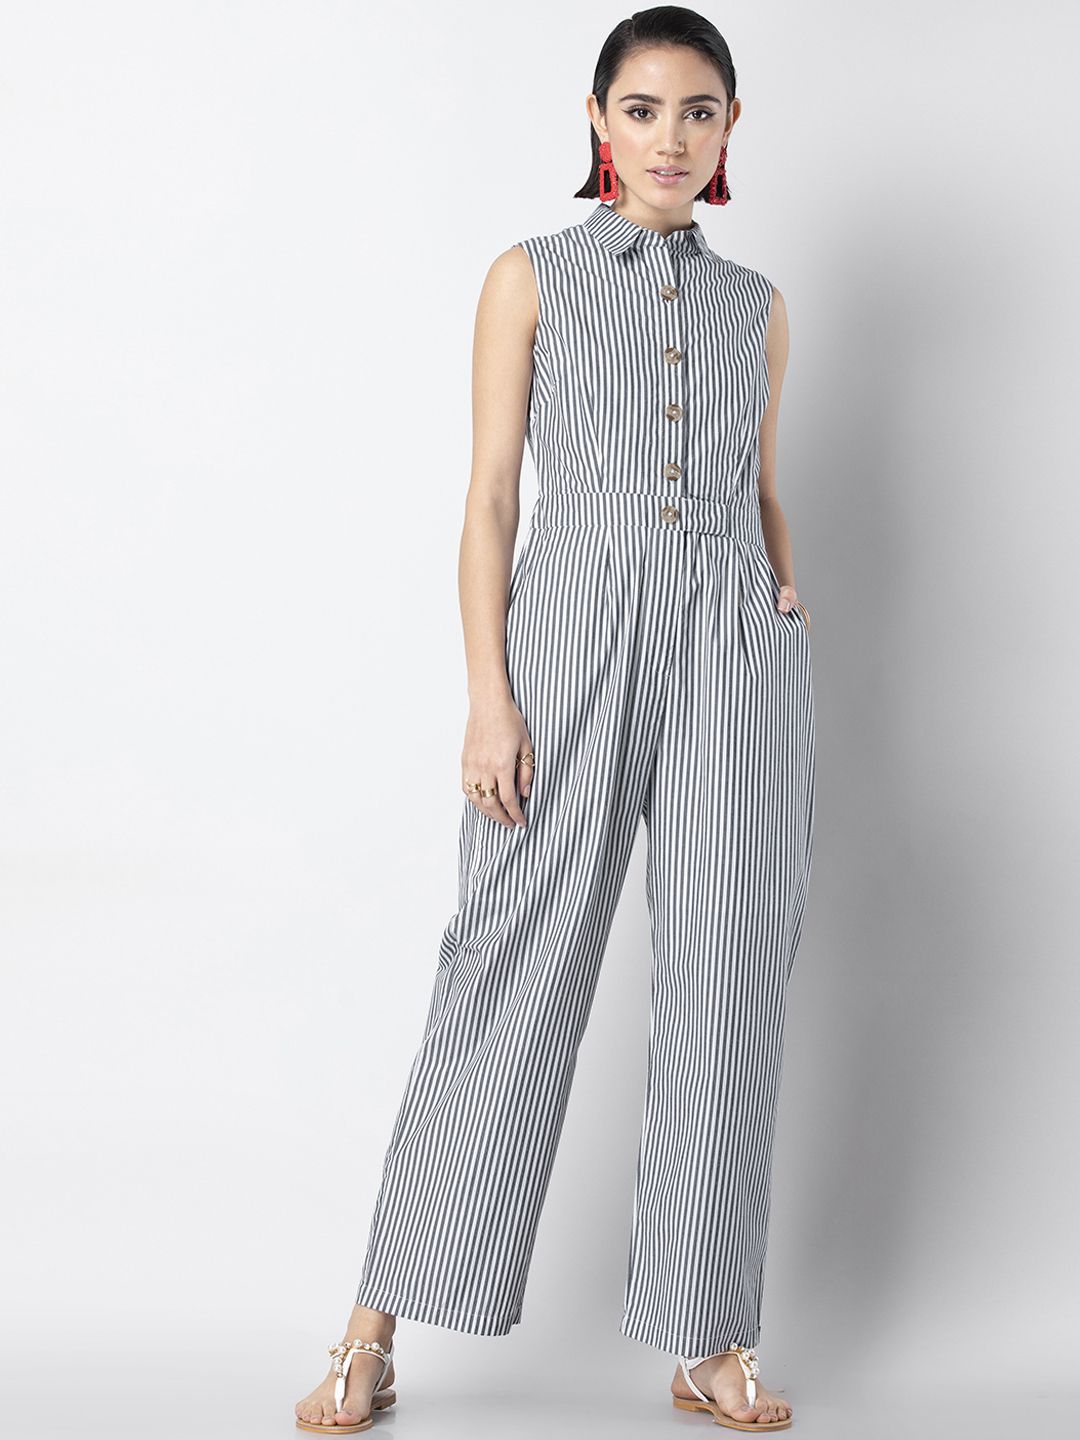 FabAlley Women Grey & White Striped Jumpsuit Price in India